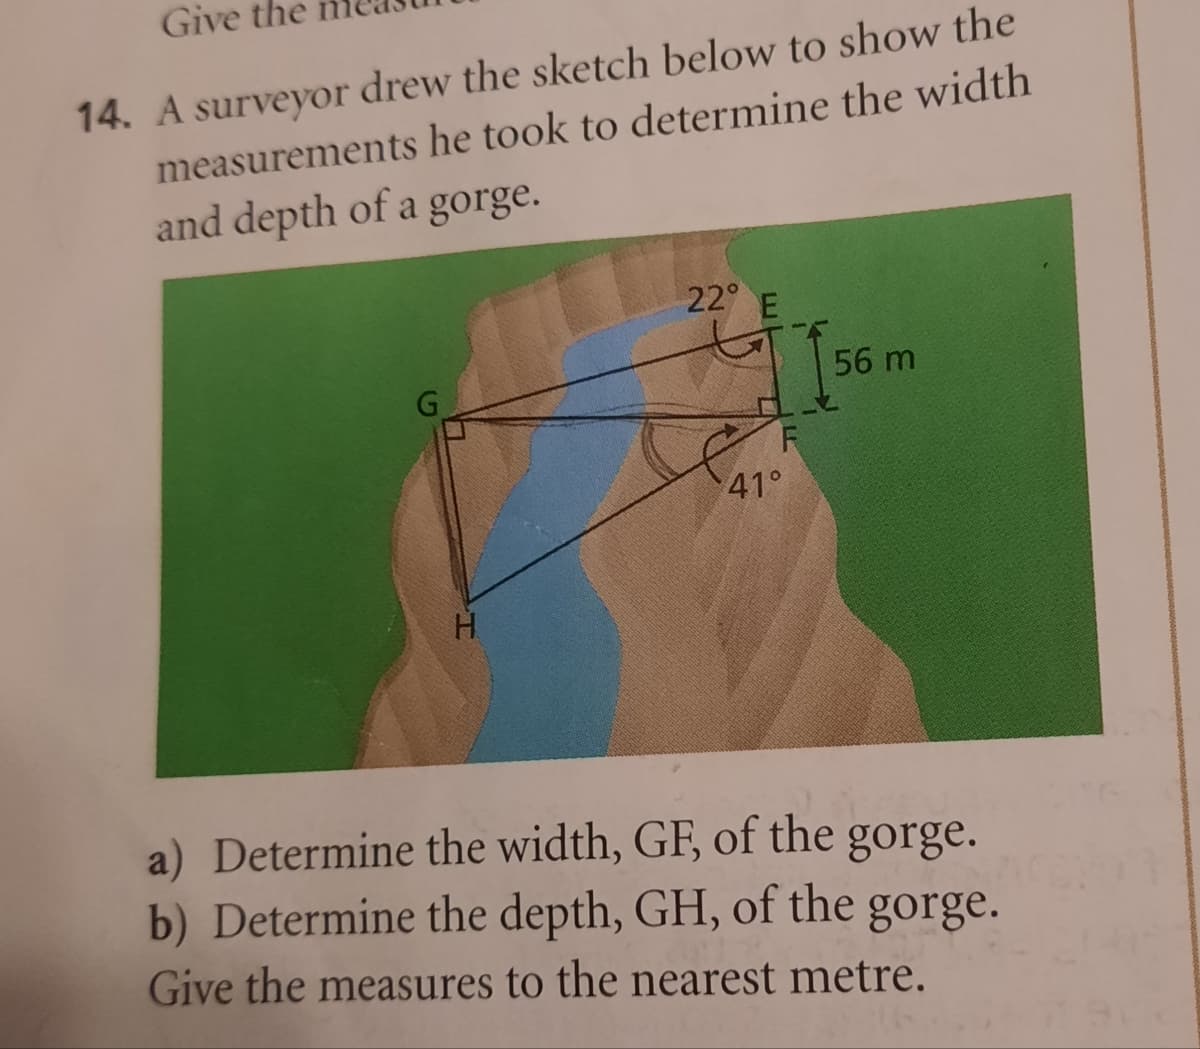 Give the
14. A surveyor drew the sketch below to show the
measurements he took to determine the width
and depth of a gorge.
H
22° E
F
41°
56 m
a) Determine the width, GF, of the
gorge.
b) Determine the depth, GH, of the gorge.
Give the measures to the nearest metre.